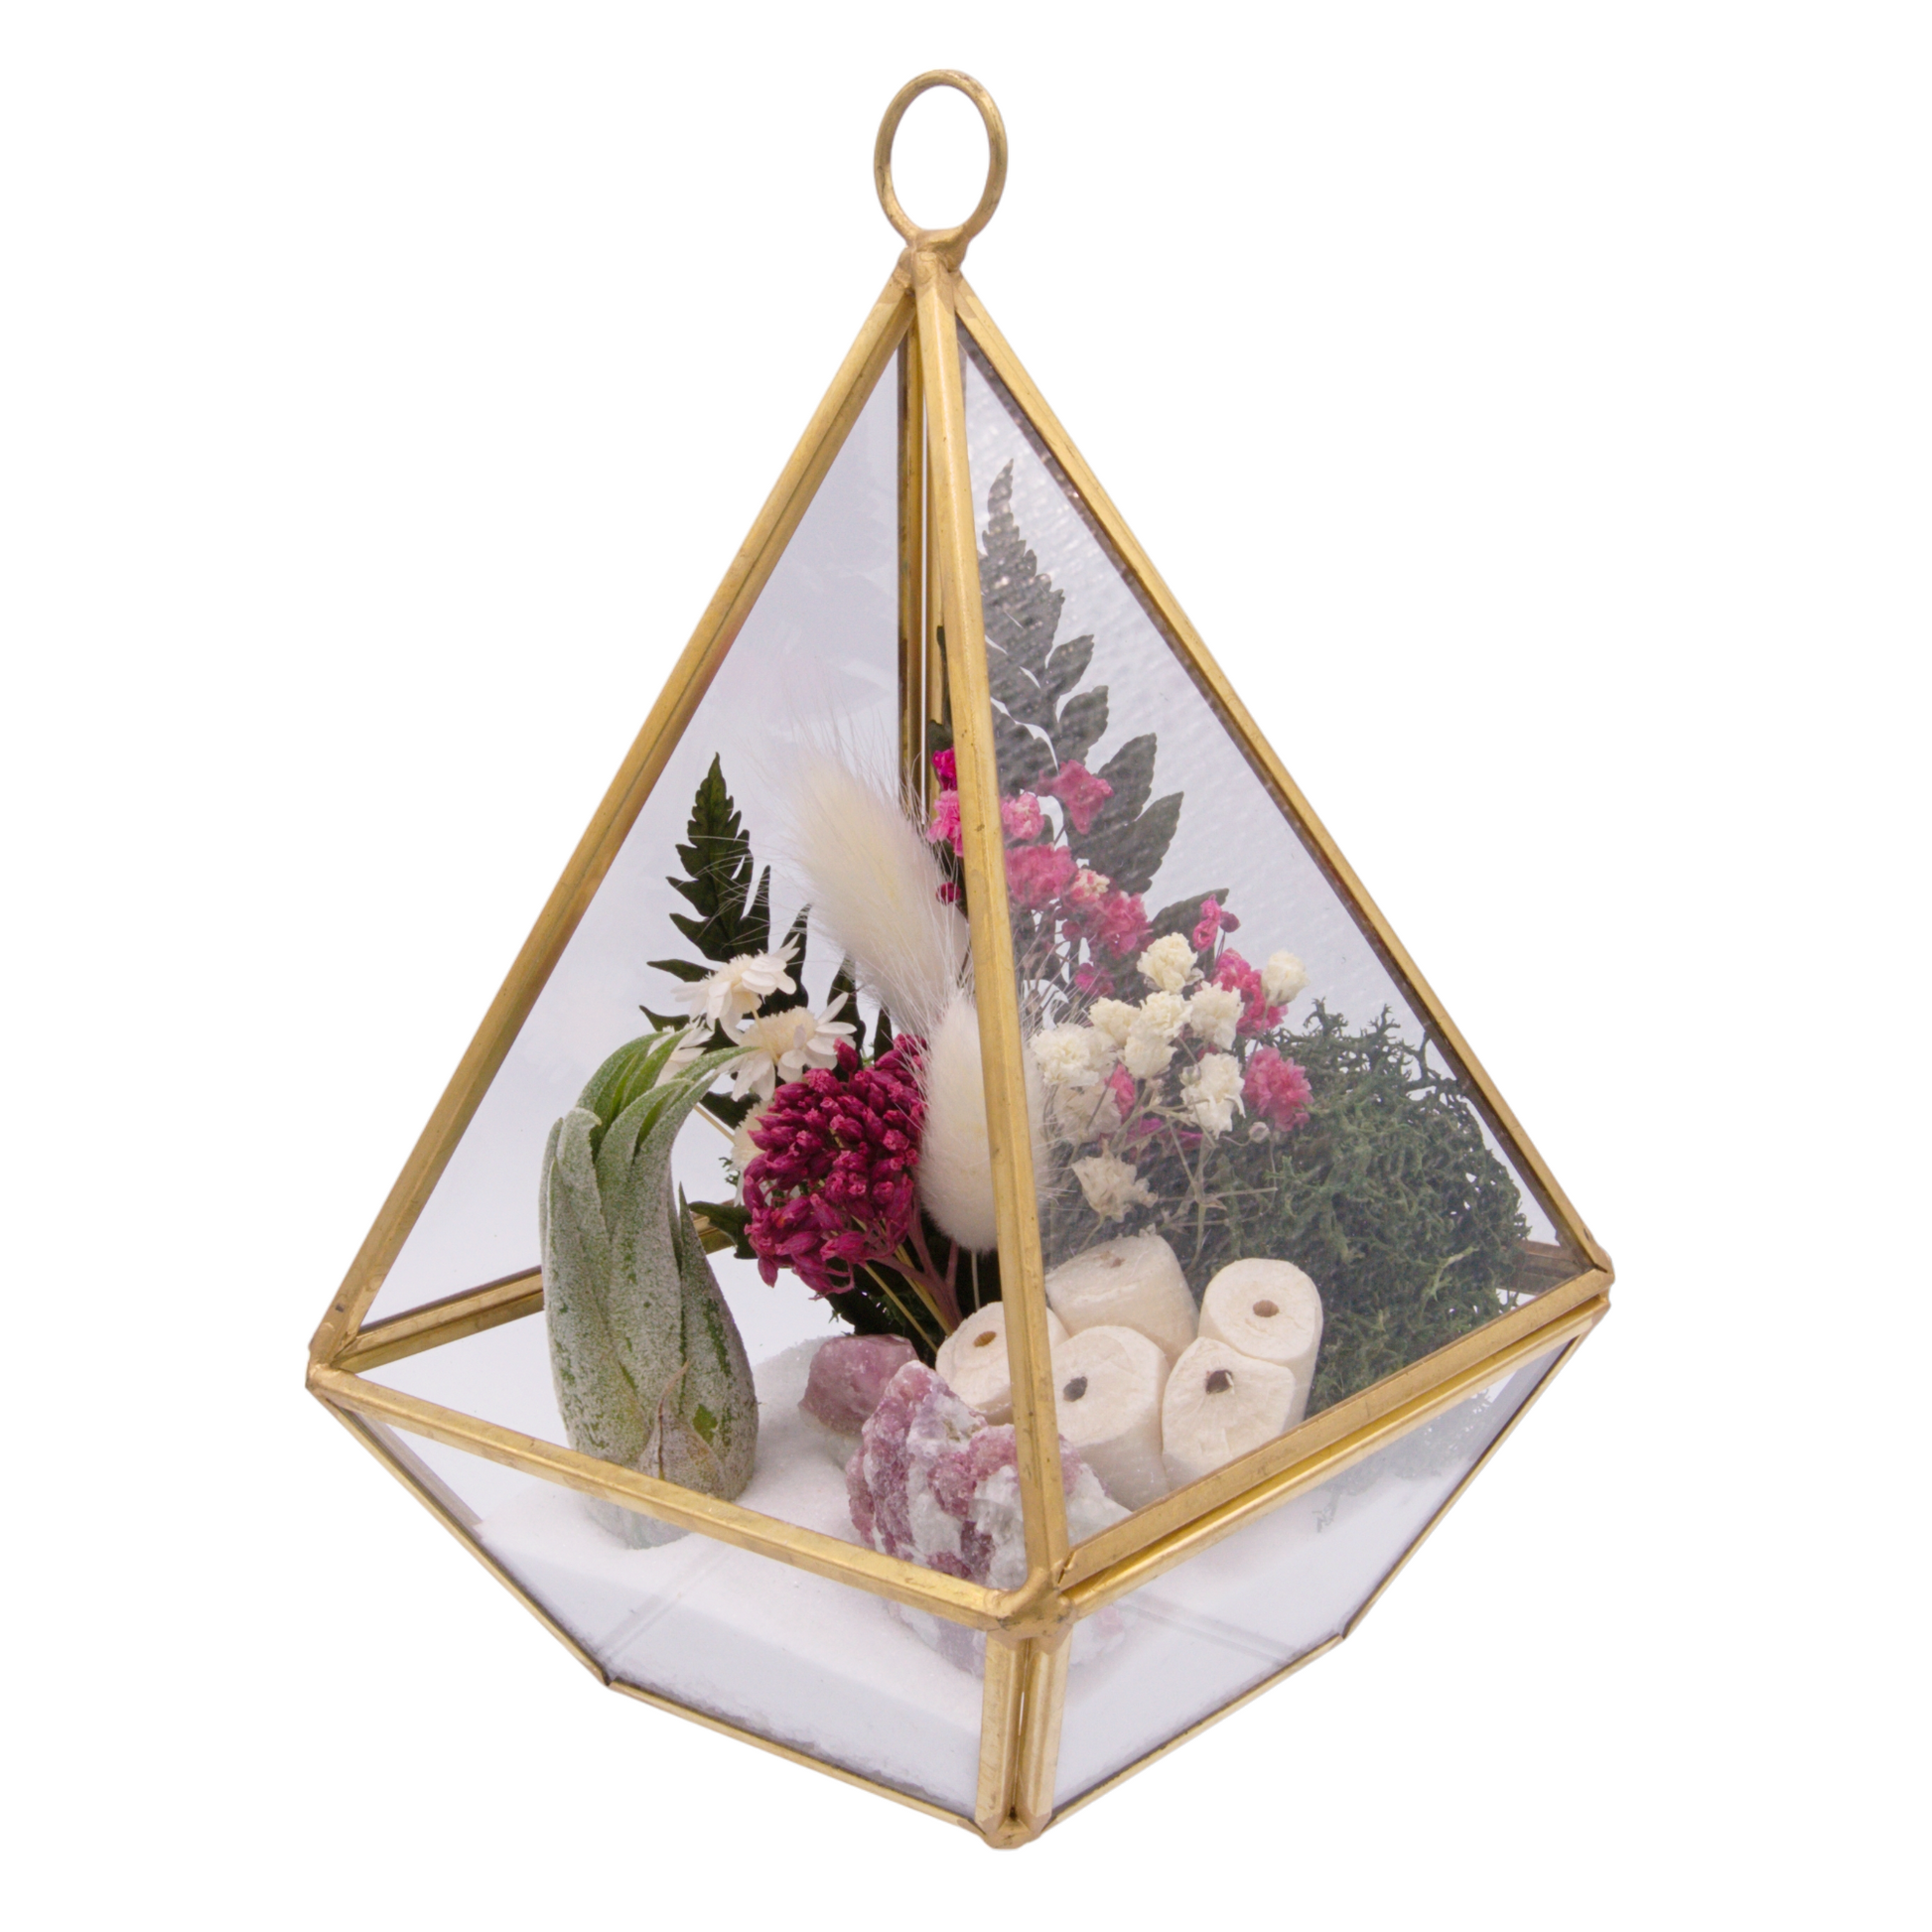 Victorian terrarium with sand, dried flowers, pink tourmaline crystals and an airplant